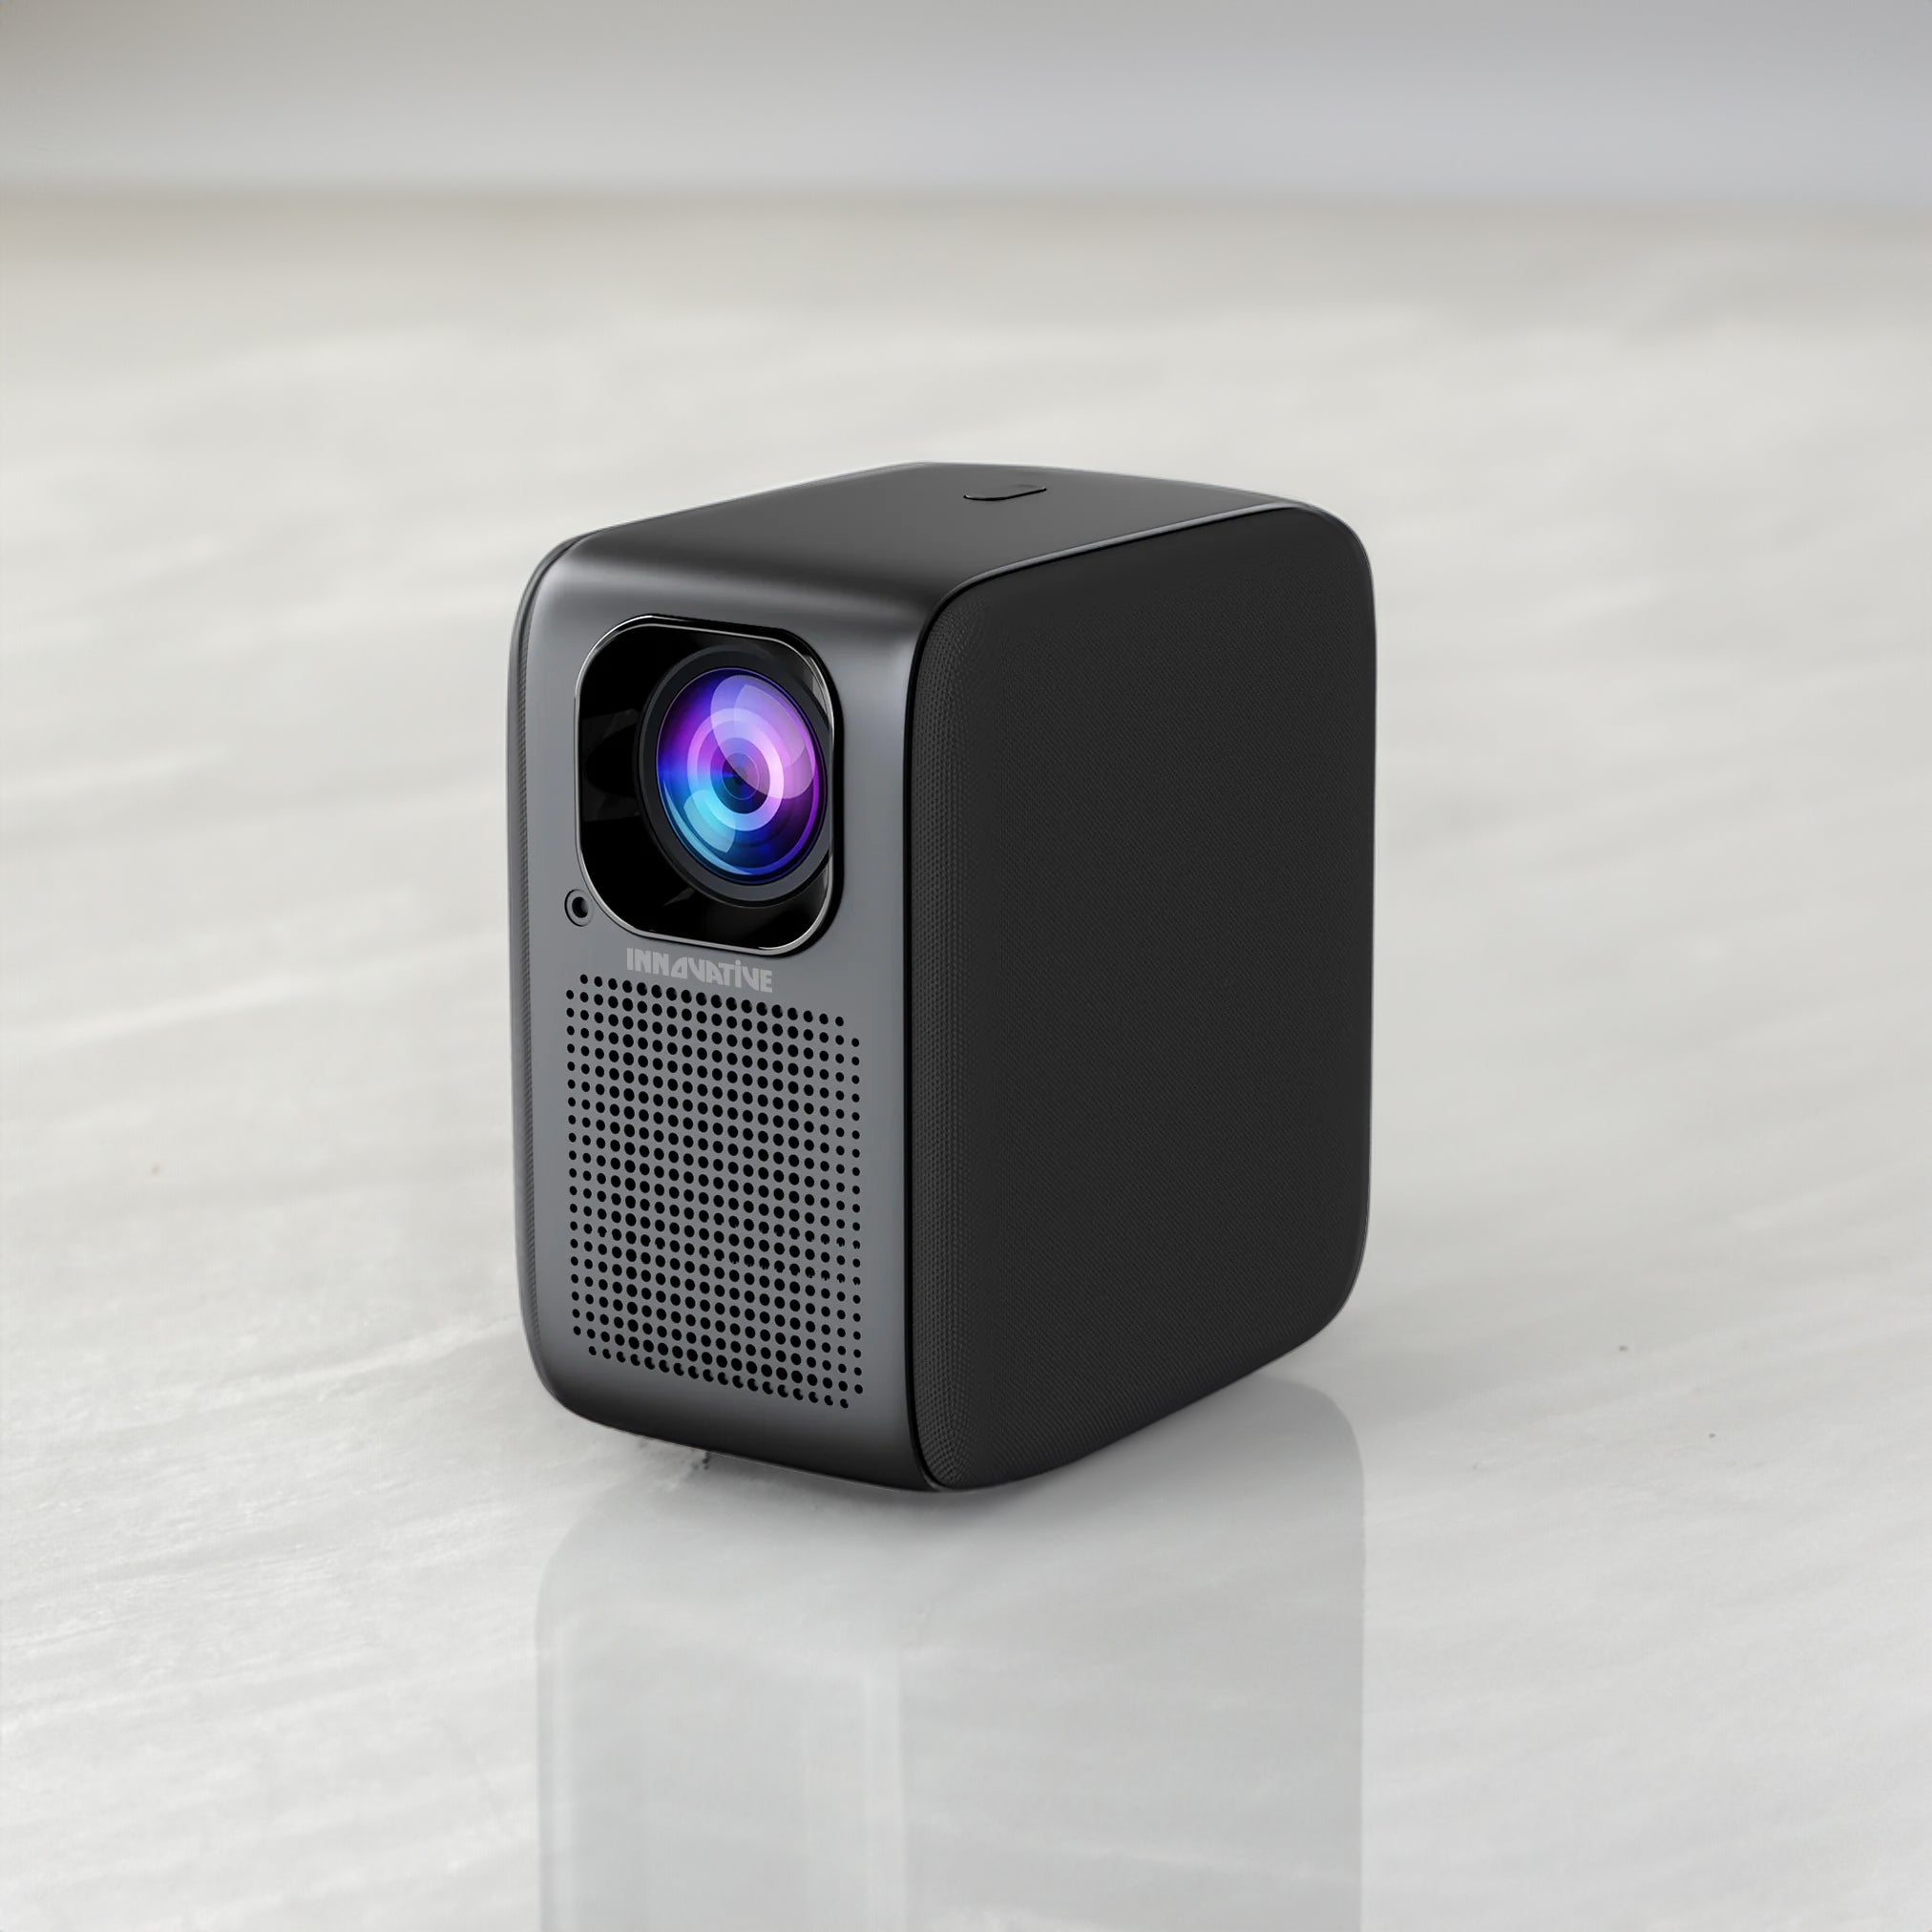 Super Short Throw Home Cinema Projector with High Brightness, inbuilt Netflix, YouTube, Awesome Dual Speakers & Bluetooth Audio -Innovative Zen 6 Smart HD1080P